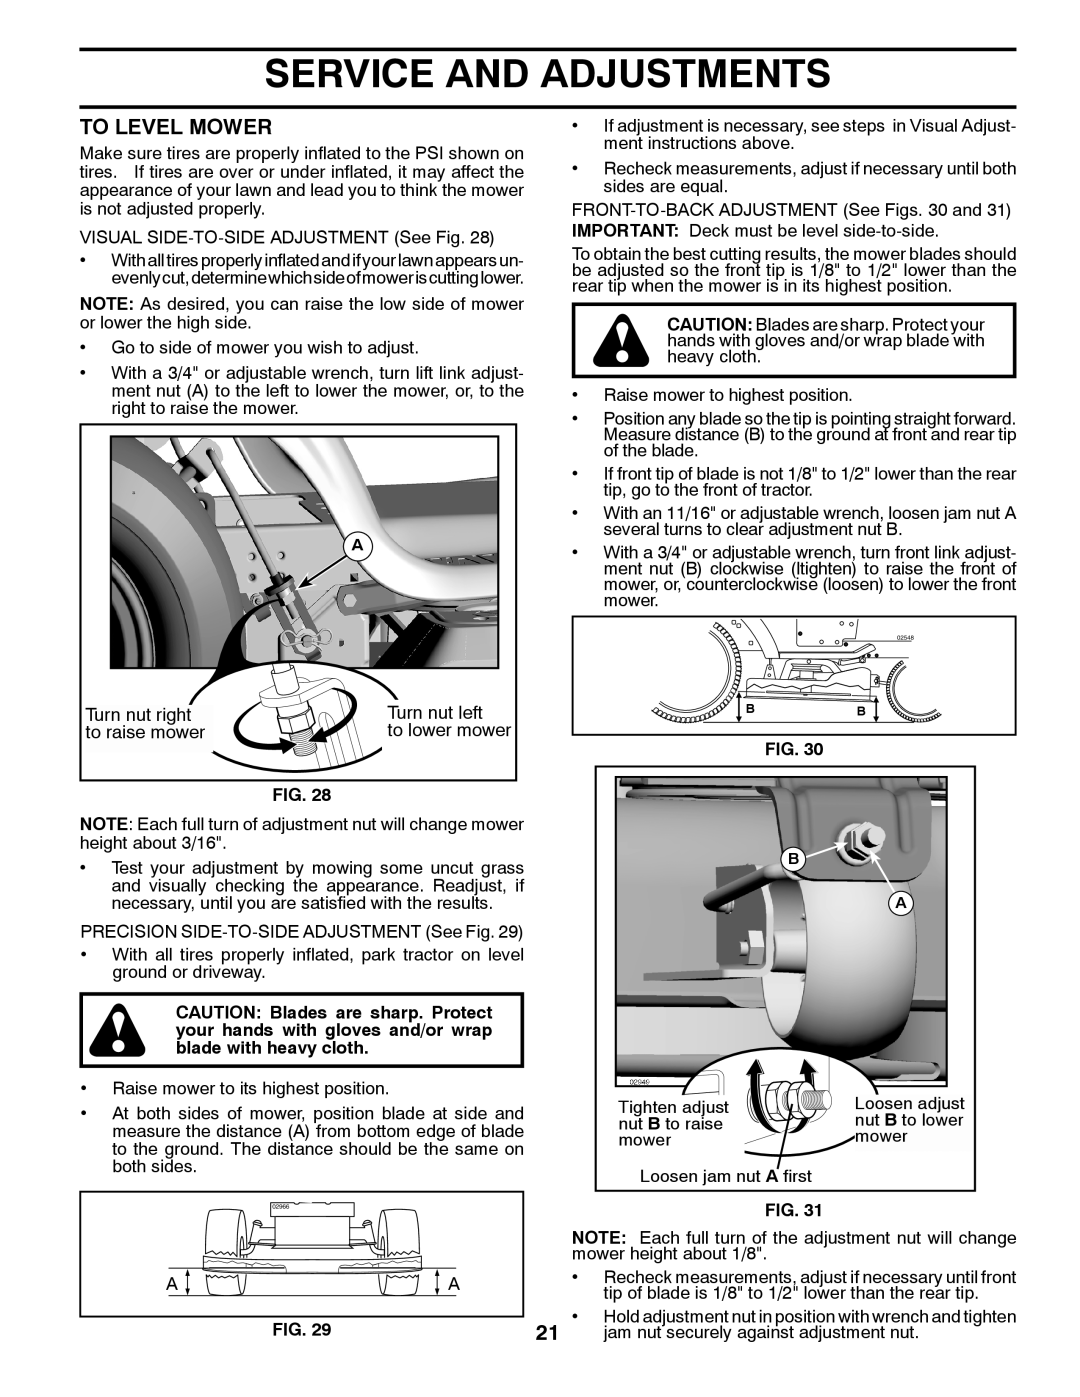 Husqvarna 96045000503 owner manual To Level Mower, Service And Adjustments, Turn nut right, Turn nut left, to raise mower 